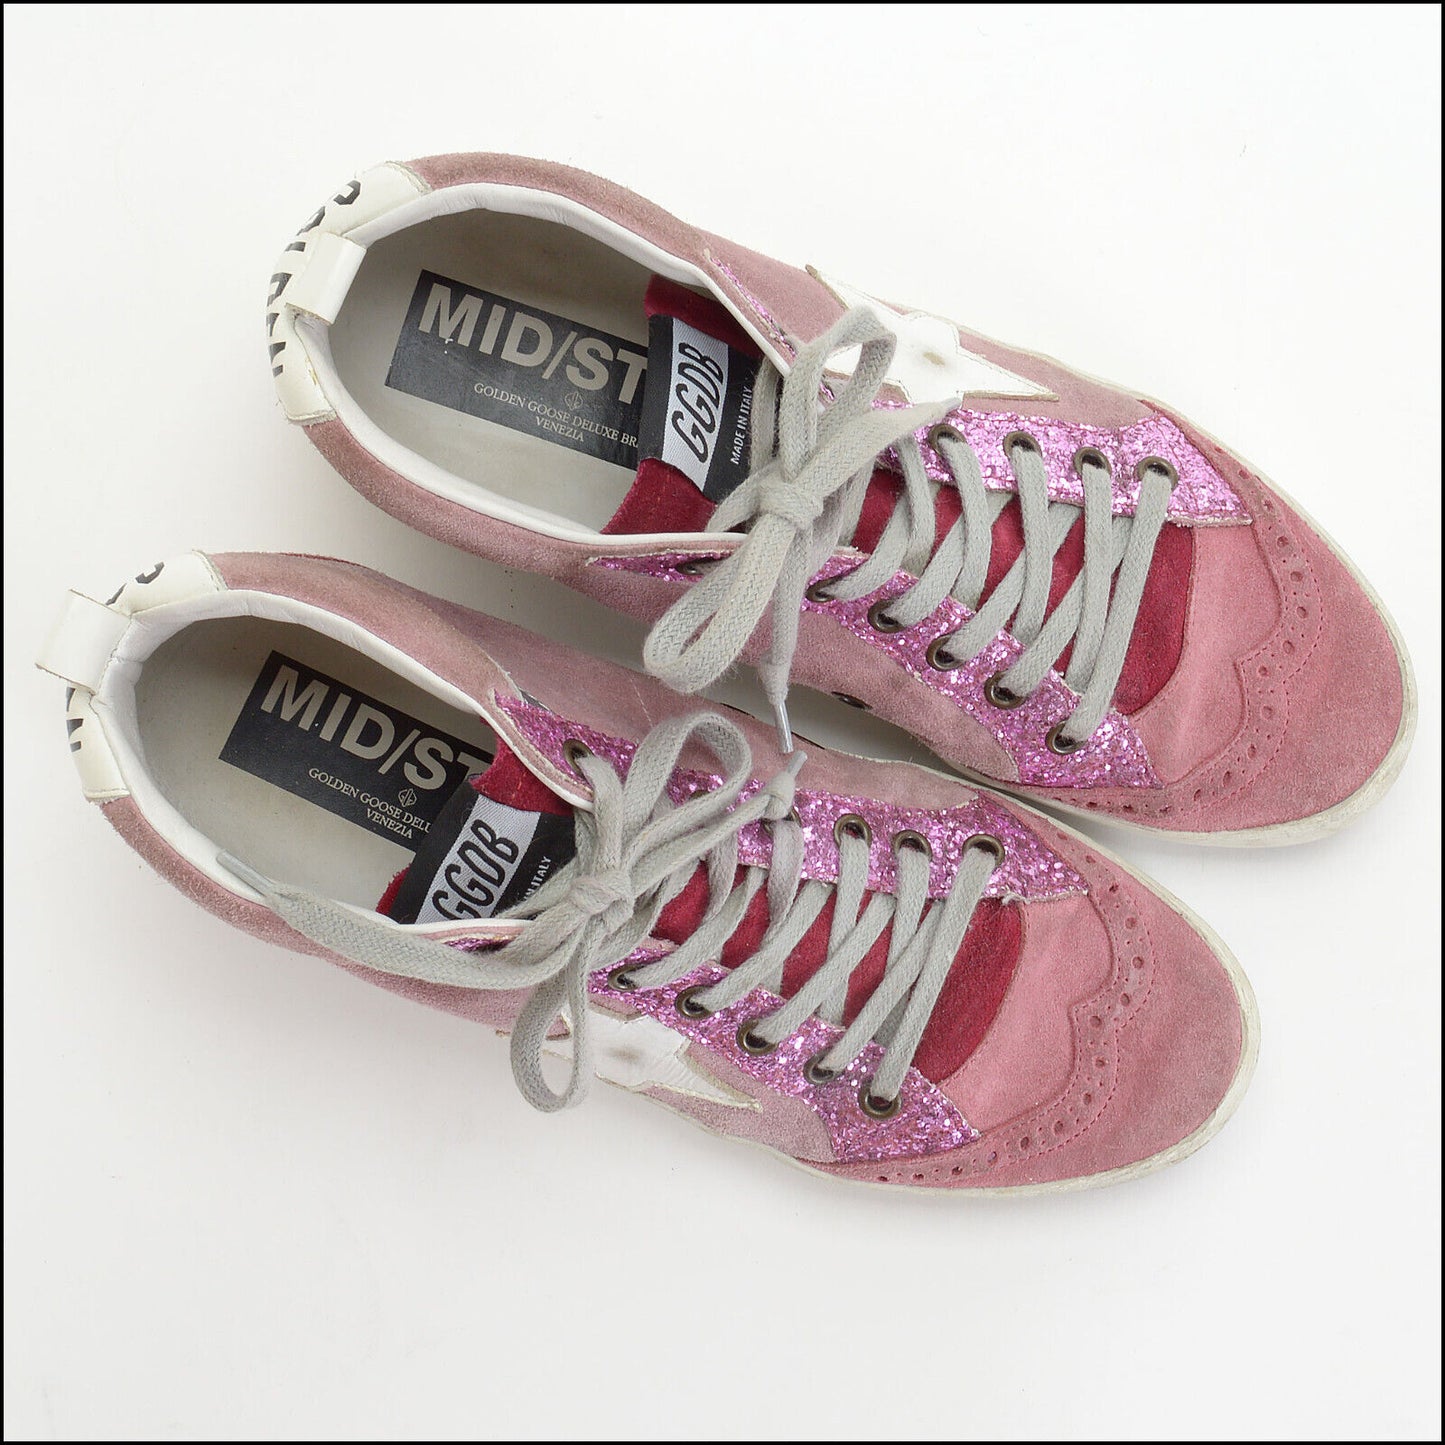 RDC13578 Authentic GOLDEN GOOSE Pink Suede Mid Star Sneakers size 39